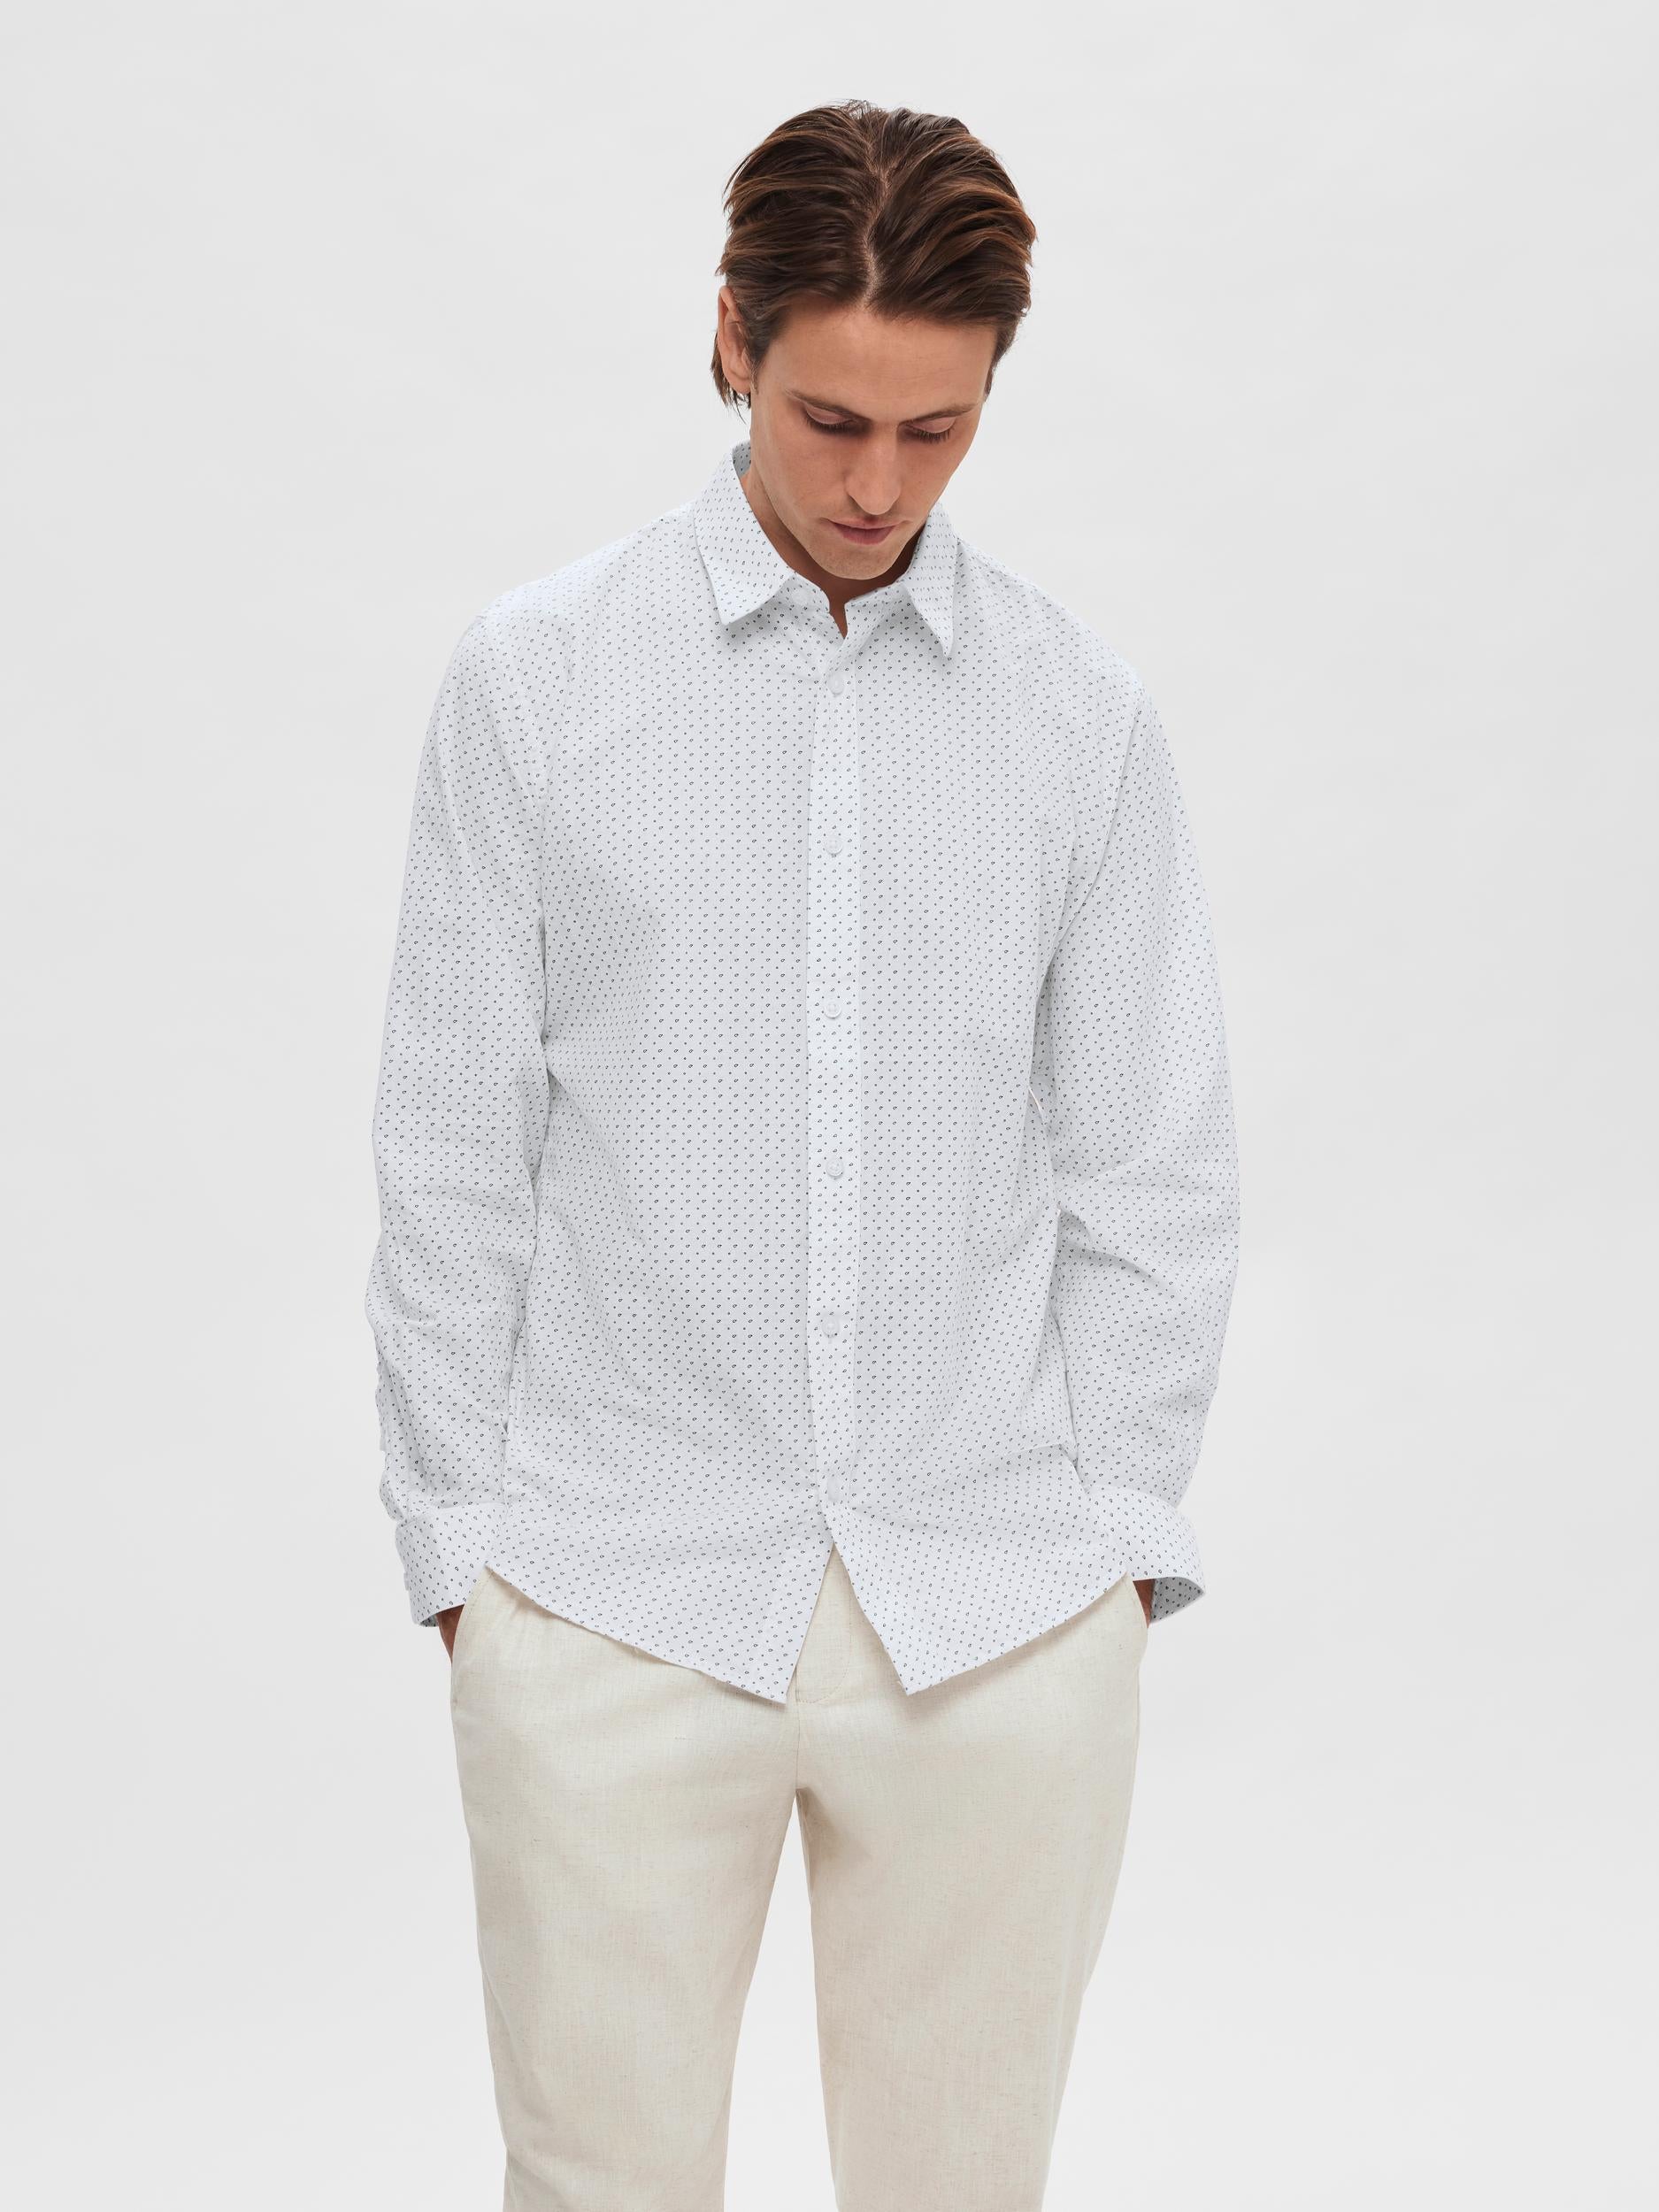 Selected white shirt with blue details